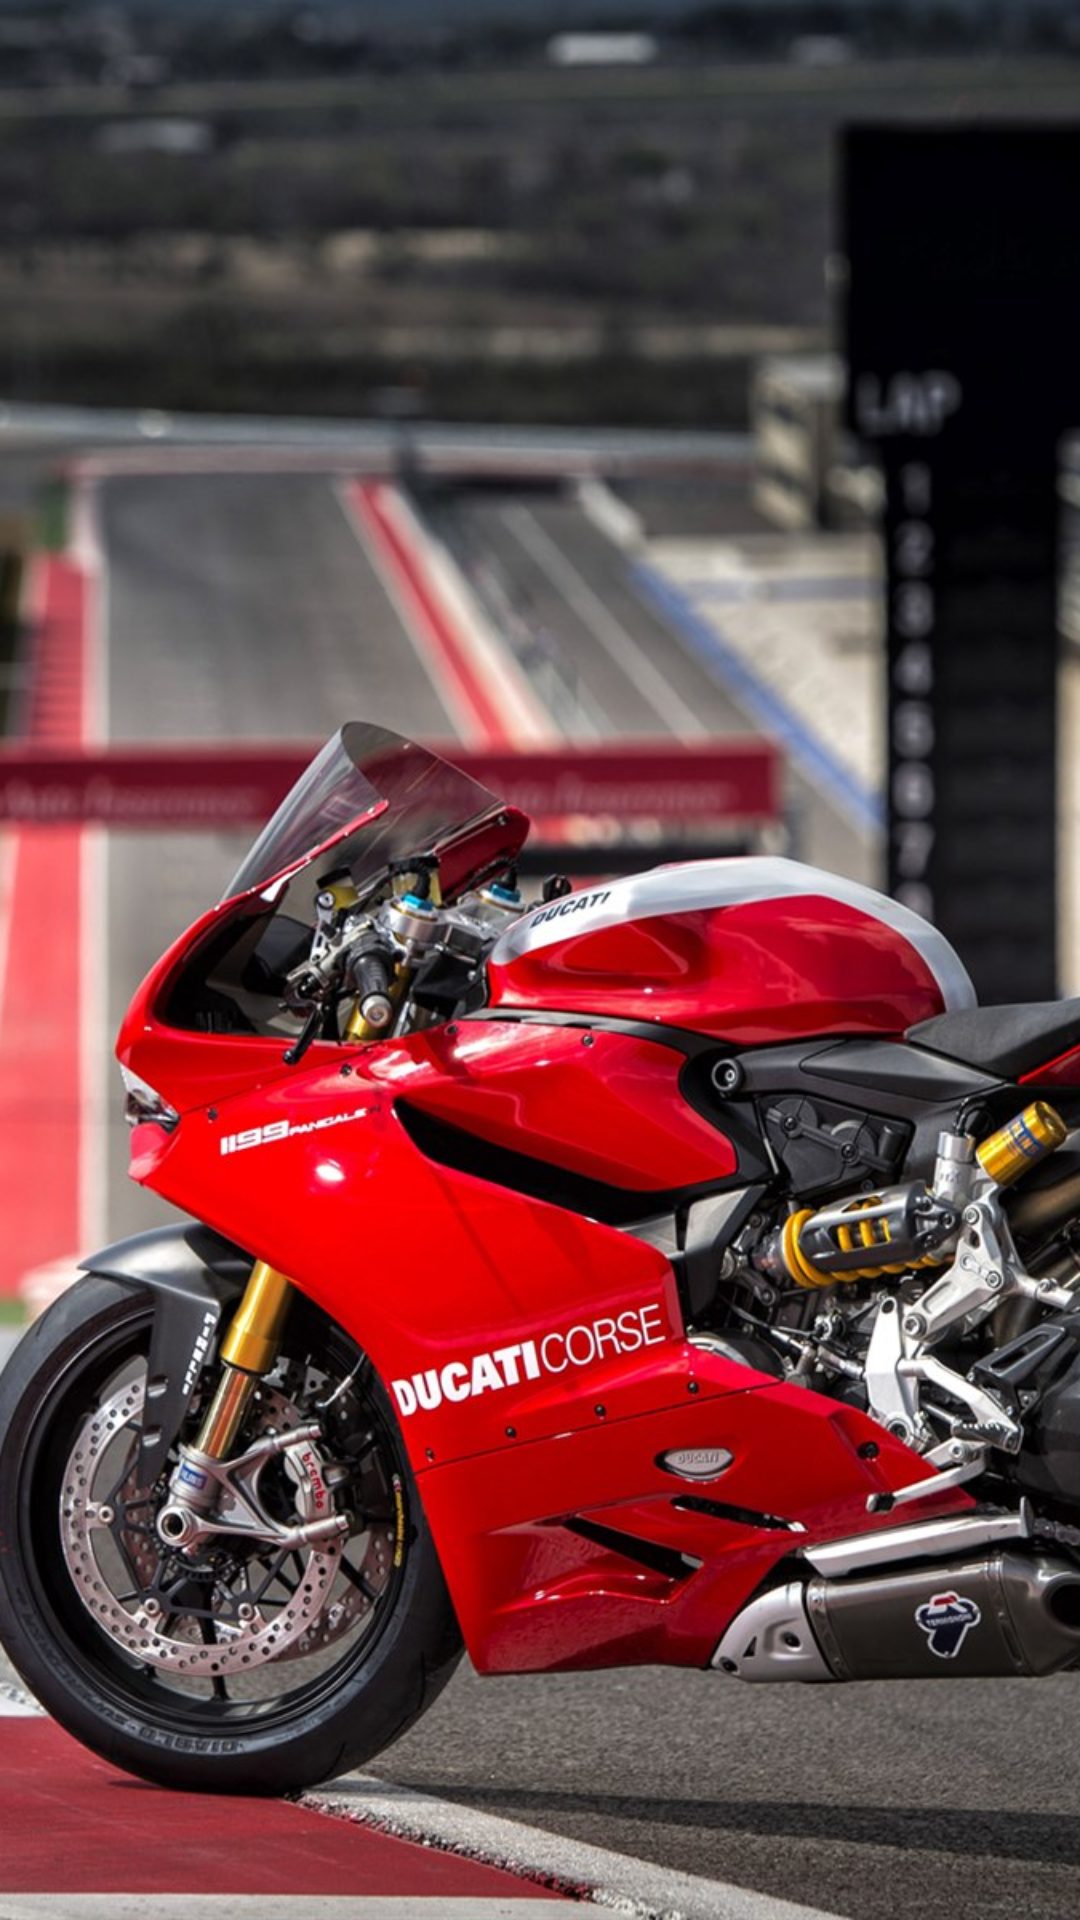 ducati iphone wallpaper,land vehicle,vehicle,motorcycle,red,car